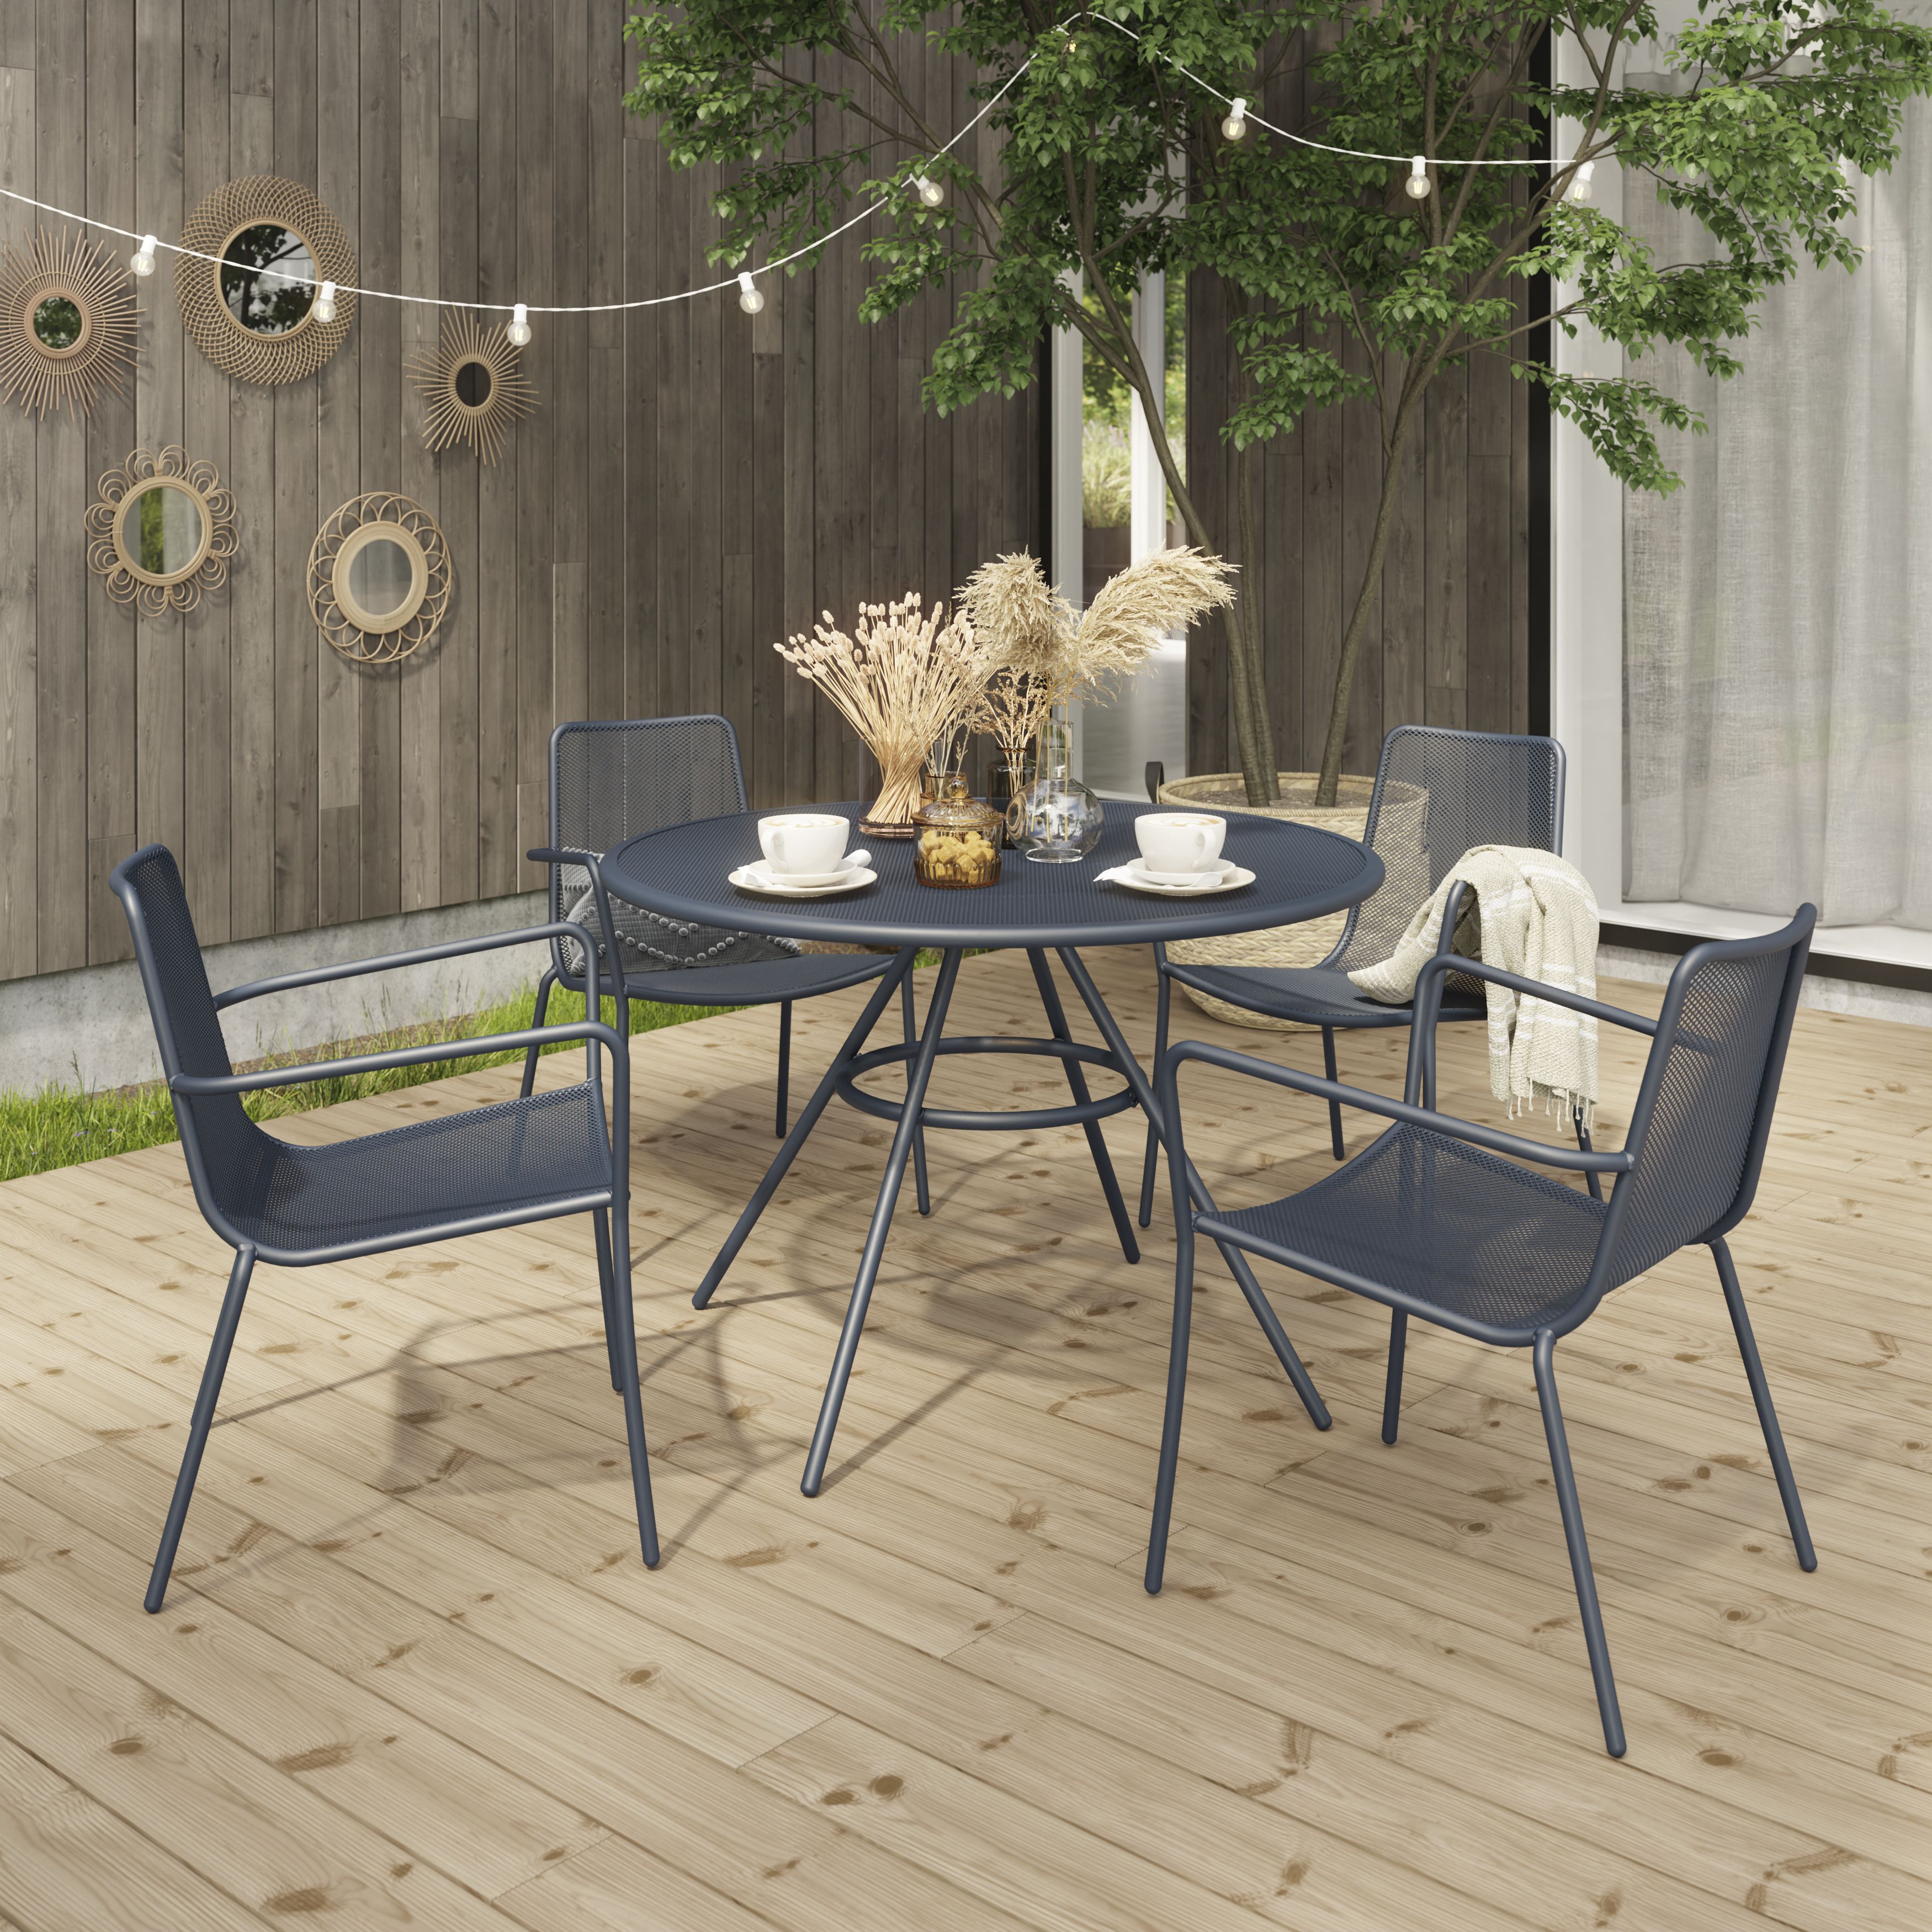 GoodHome Kilifi Midnight navy Metal 4 seater Round Dining table